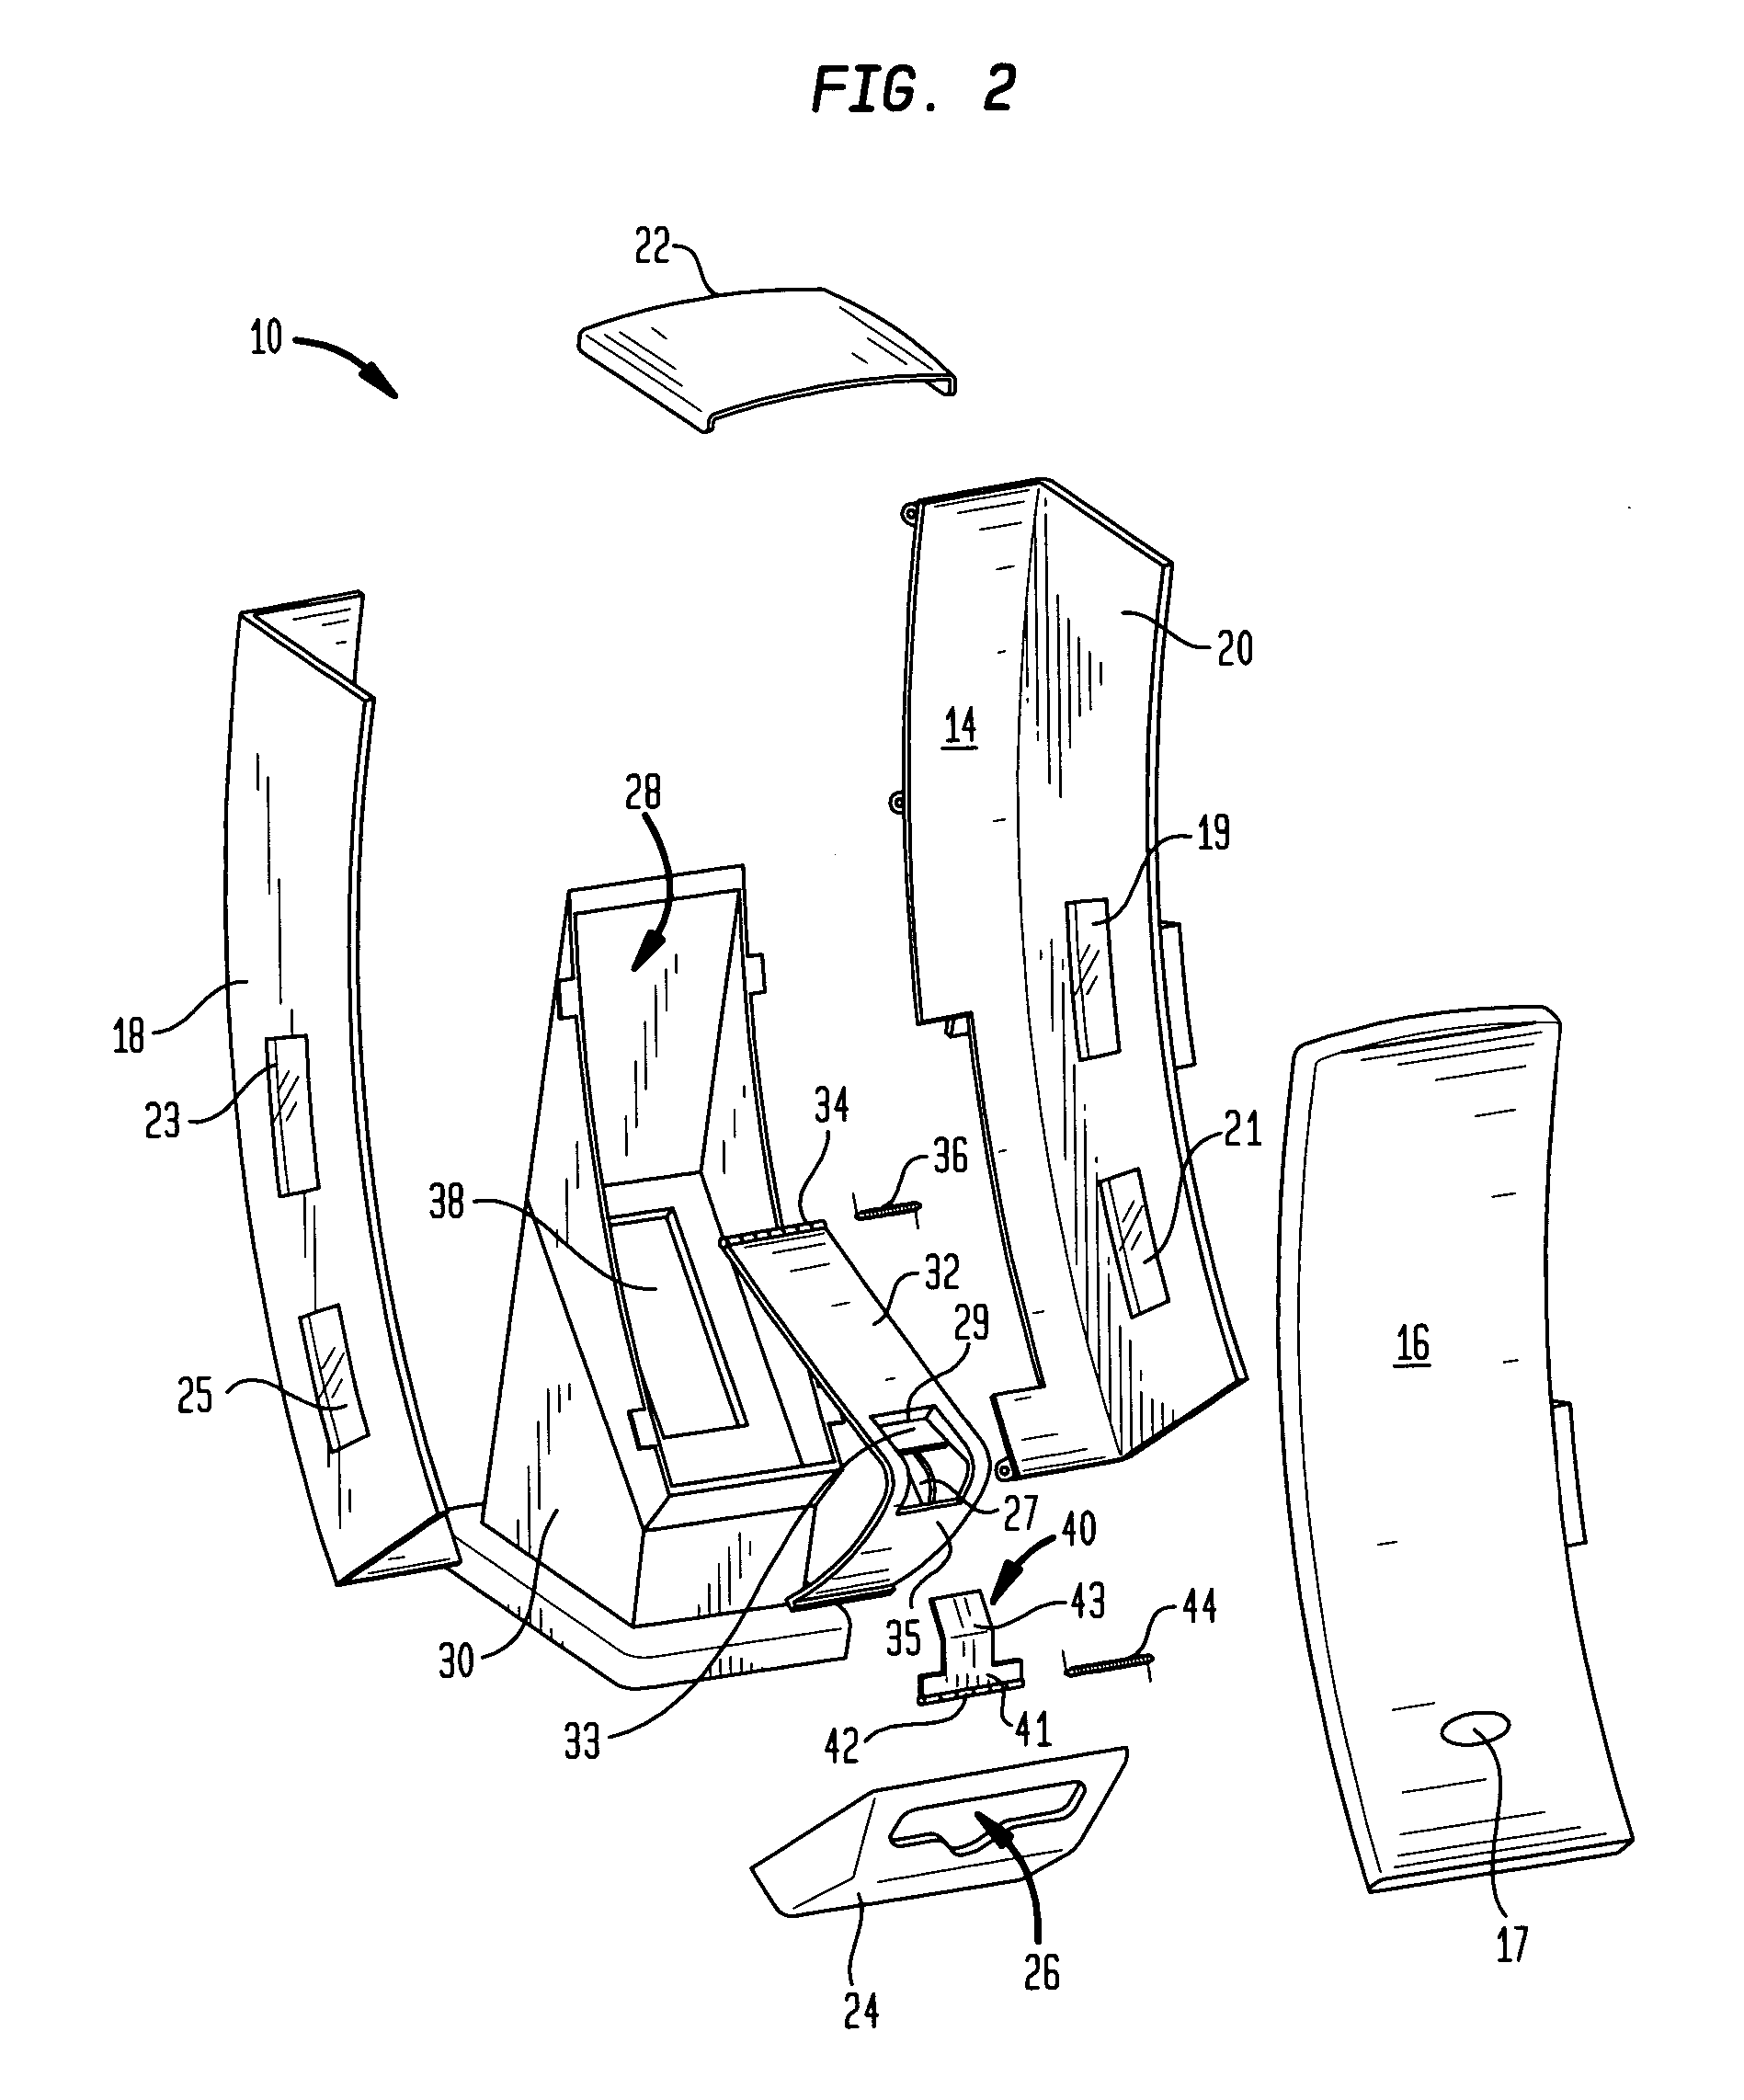 Gravity-feed napkin dispenser with internal blocking assembly